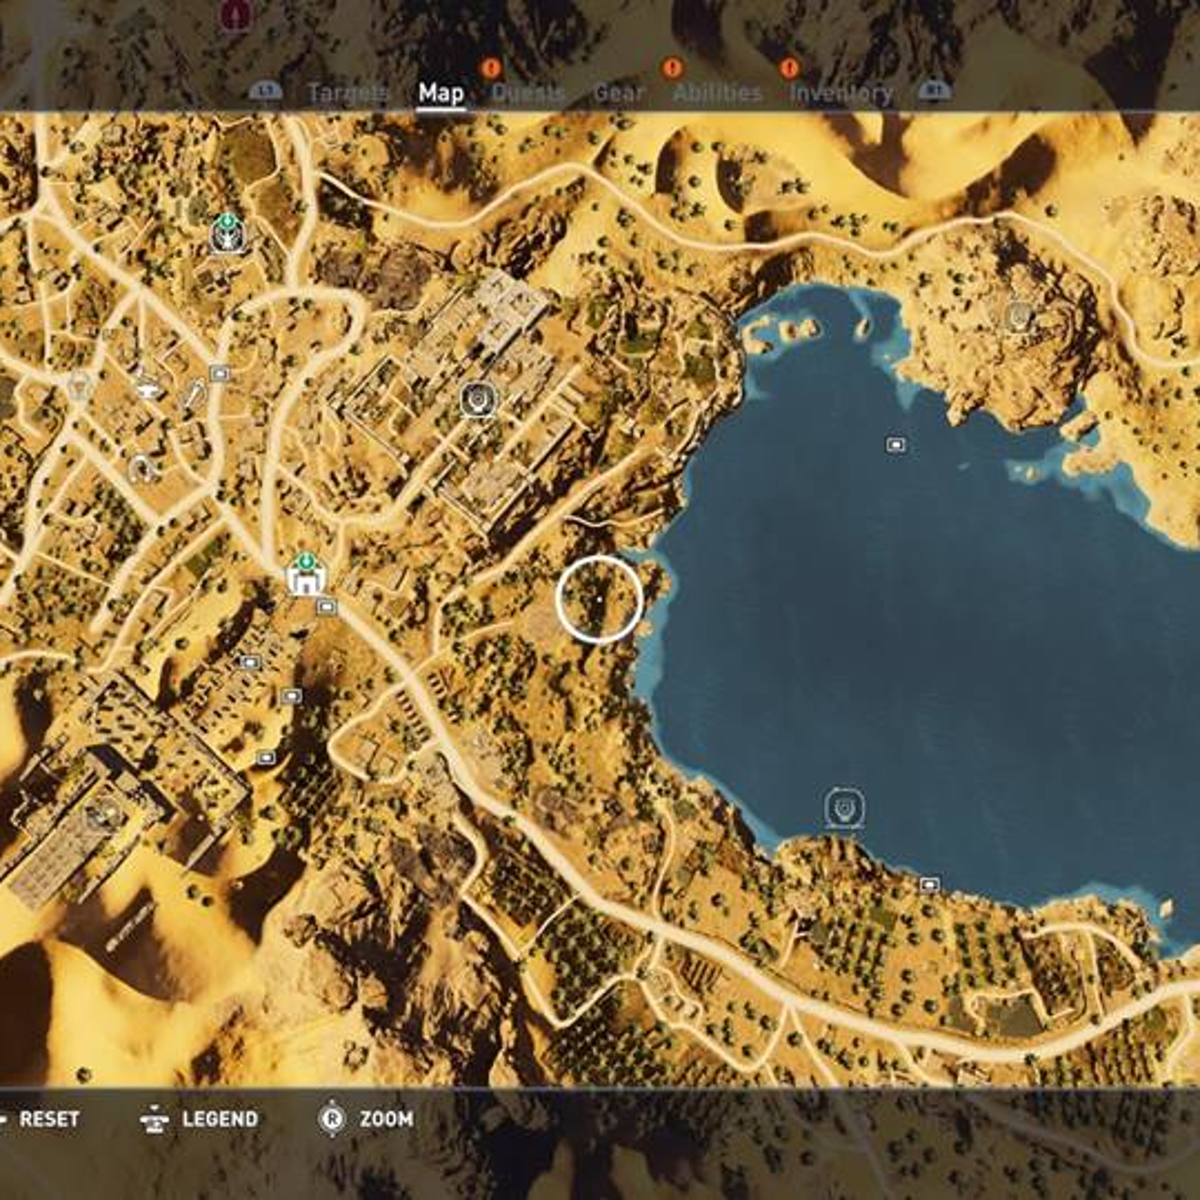 Assassin's Creed Origins: where to find and solve all 25 Papyrus Puzzles to  earn the best loot